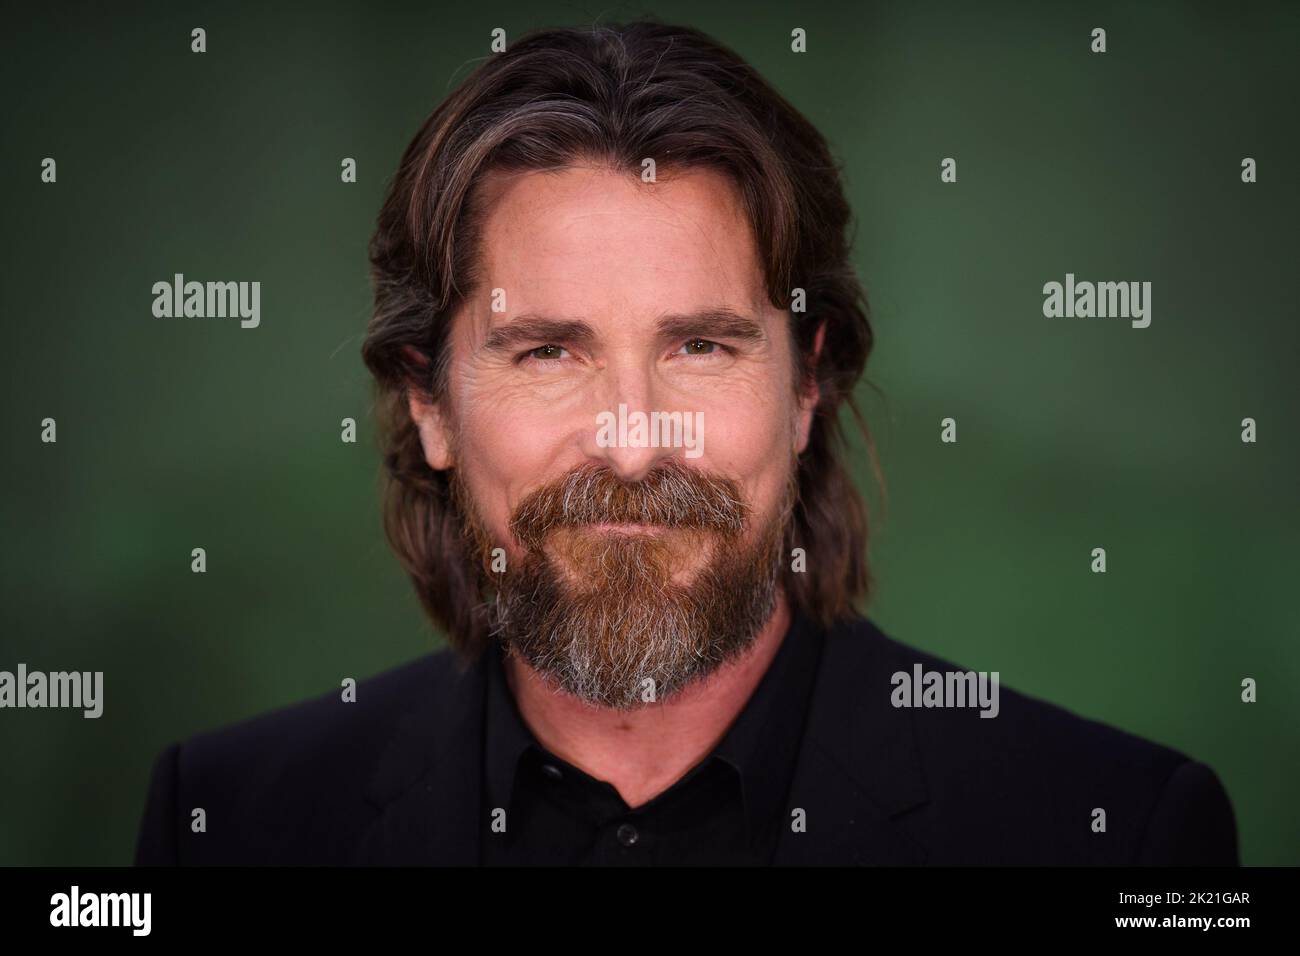 London, UK. 22 September 2022. Christian Bale attending the European premiere of Amsterdam at the Odeon Luxe Leicester Square Cinema, London Picture date: Thursday September 22, 2022. Photo credit should read: Matt Crossick/Empics/Alamy Live News Stock Photo